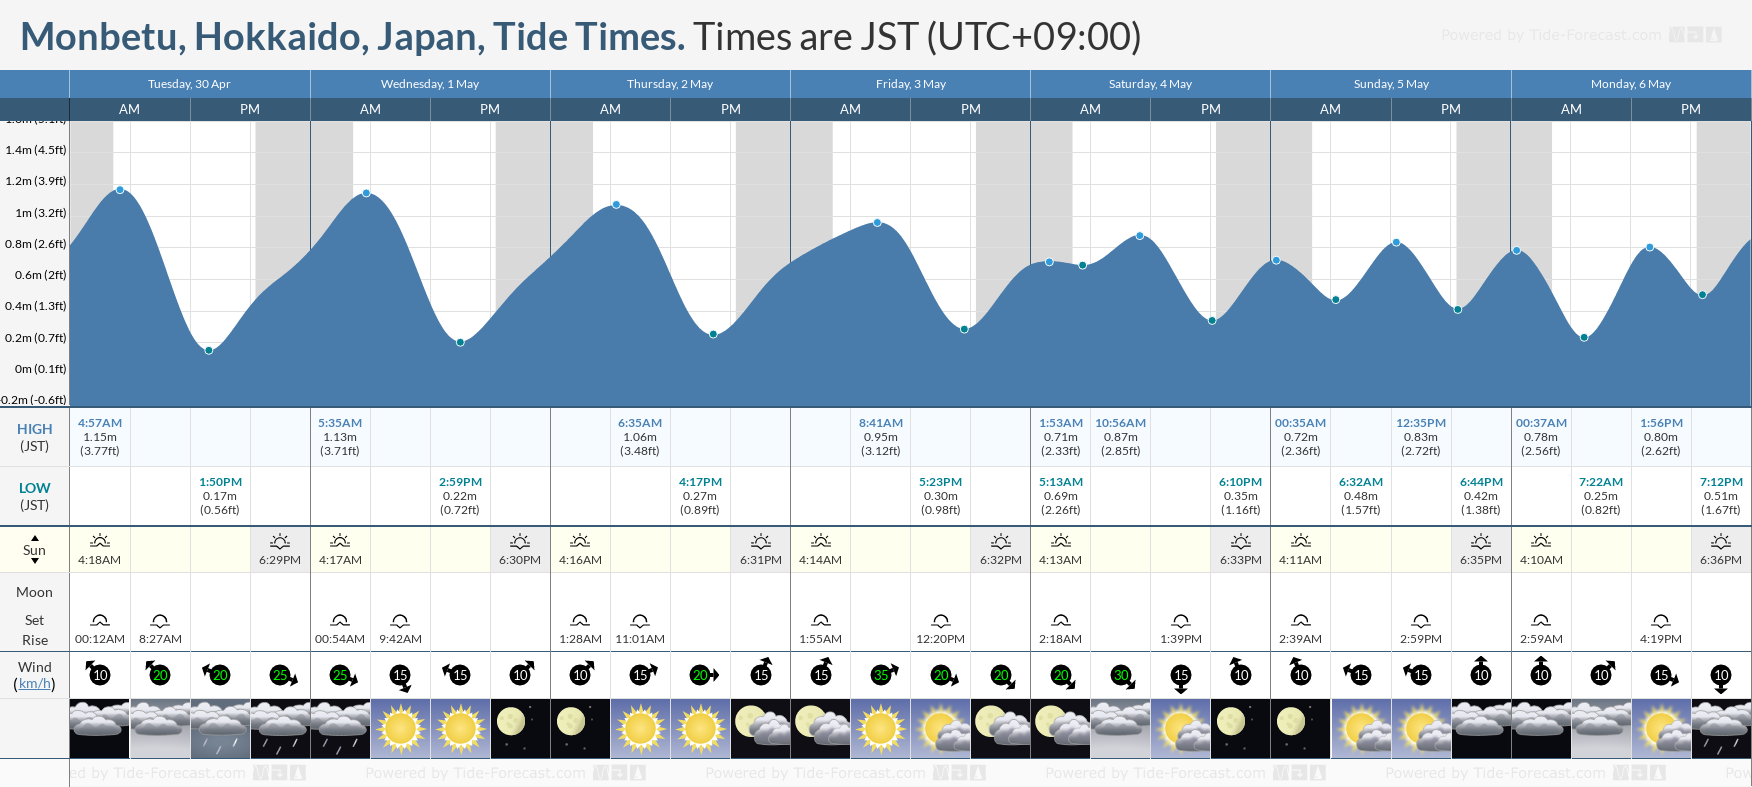 Monbetu, Hokkaido, Japan Tide Chart including high and low tide tide times for the next 7 days